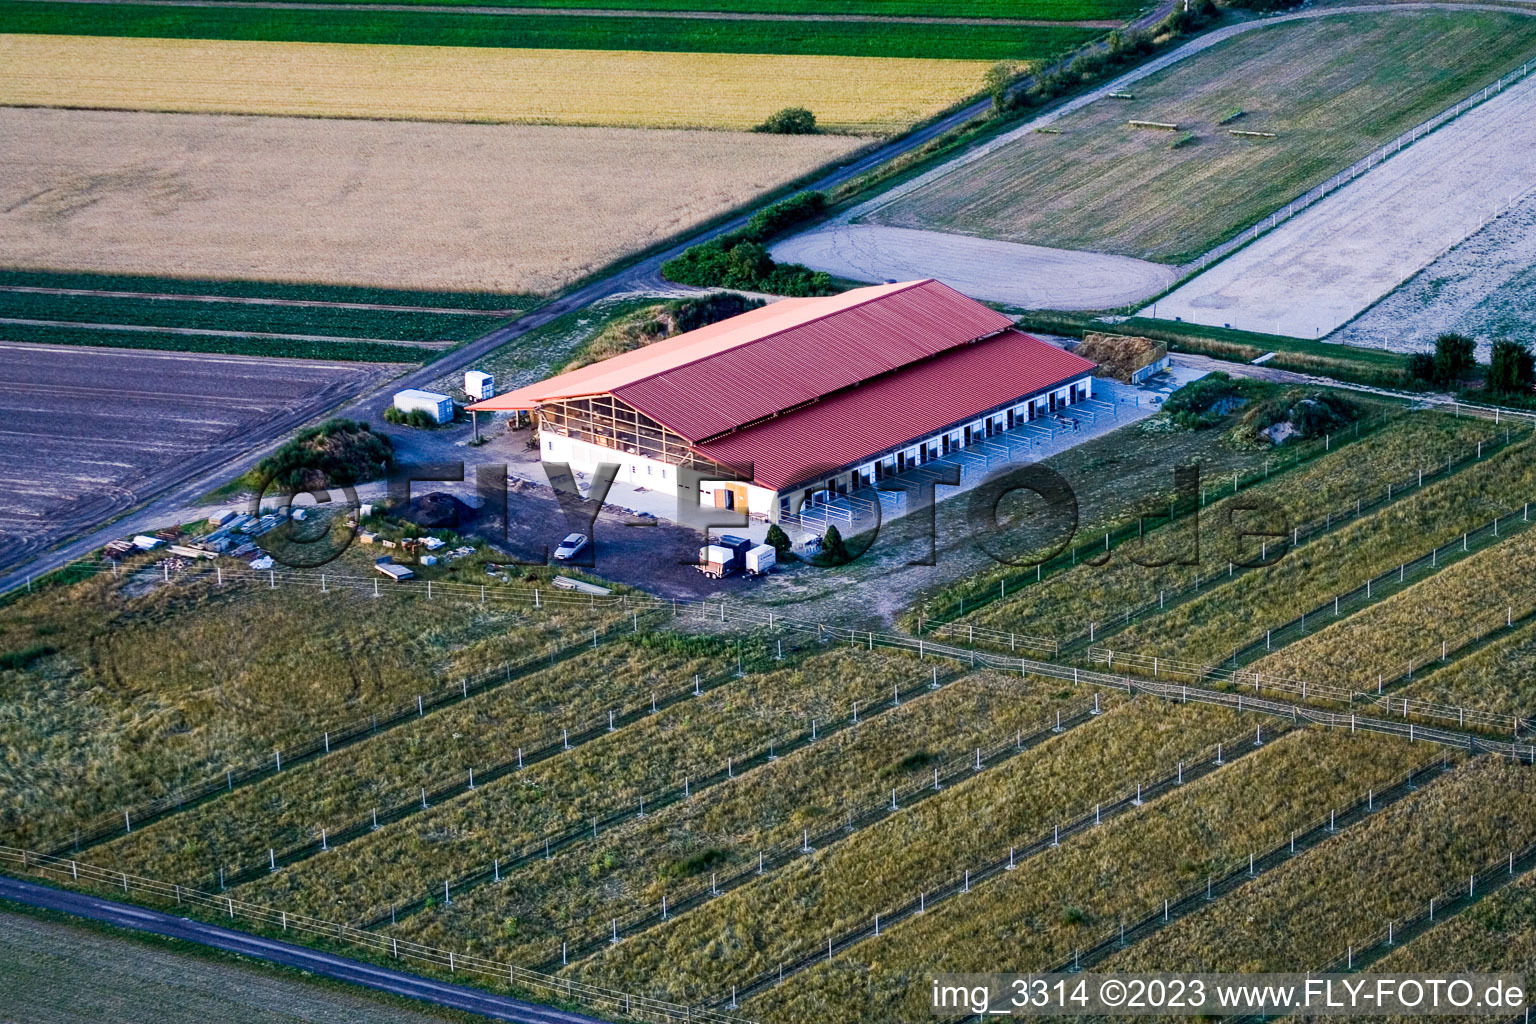 Aerial view of Riding stable in Hatzenbühl in the state Rhineland-Palatinate, Germany